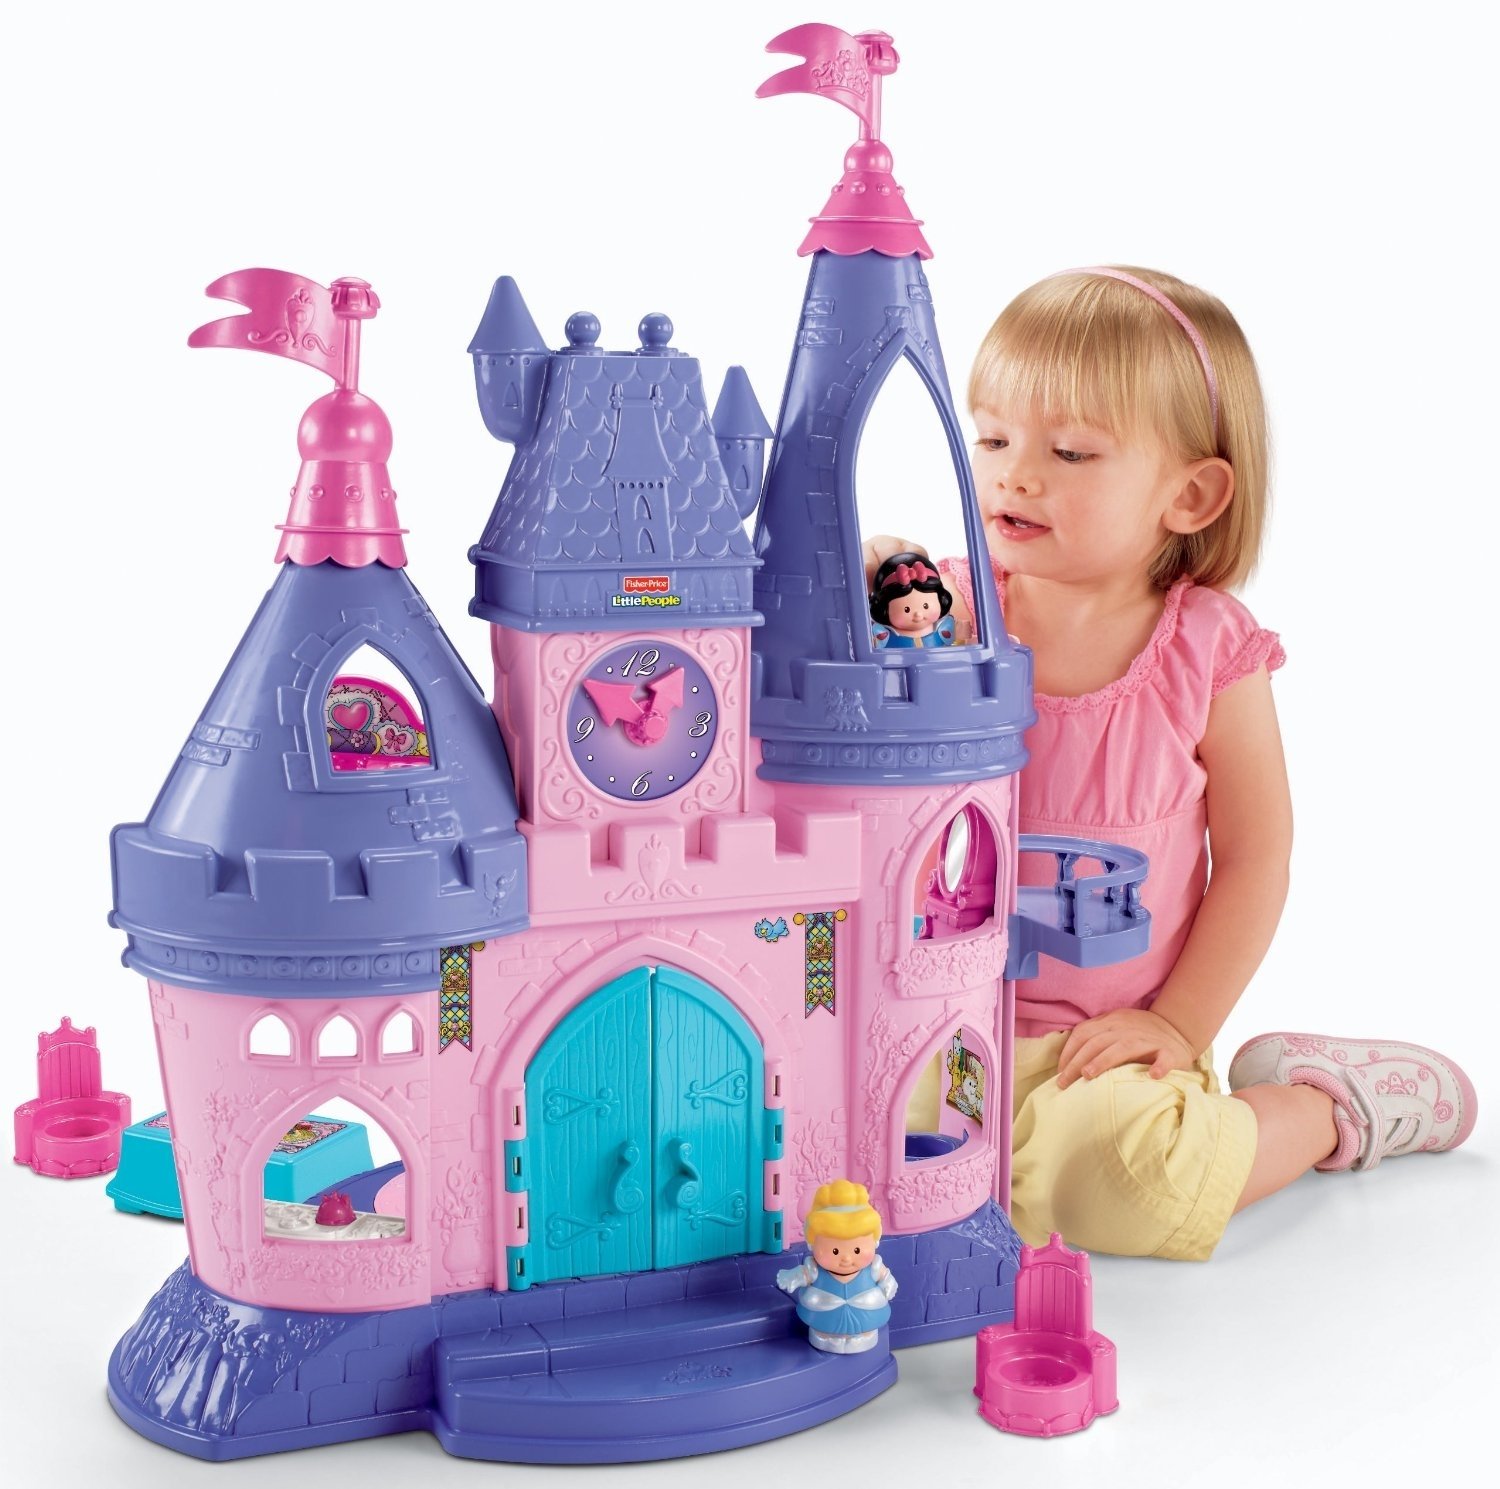 10 Most Recommended Gift Ideas For 3 Year Old Baby Girl best gifts for 2 year old girls in 2017 disney princess songs 7 2023